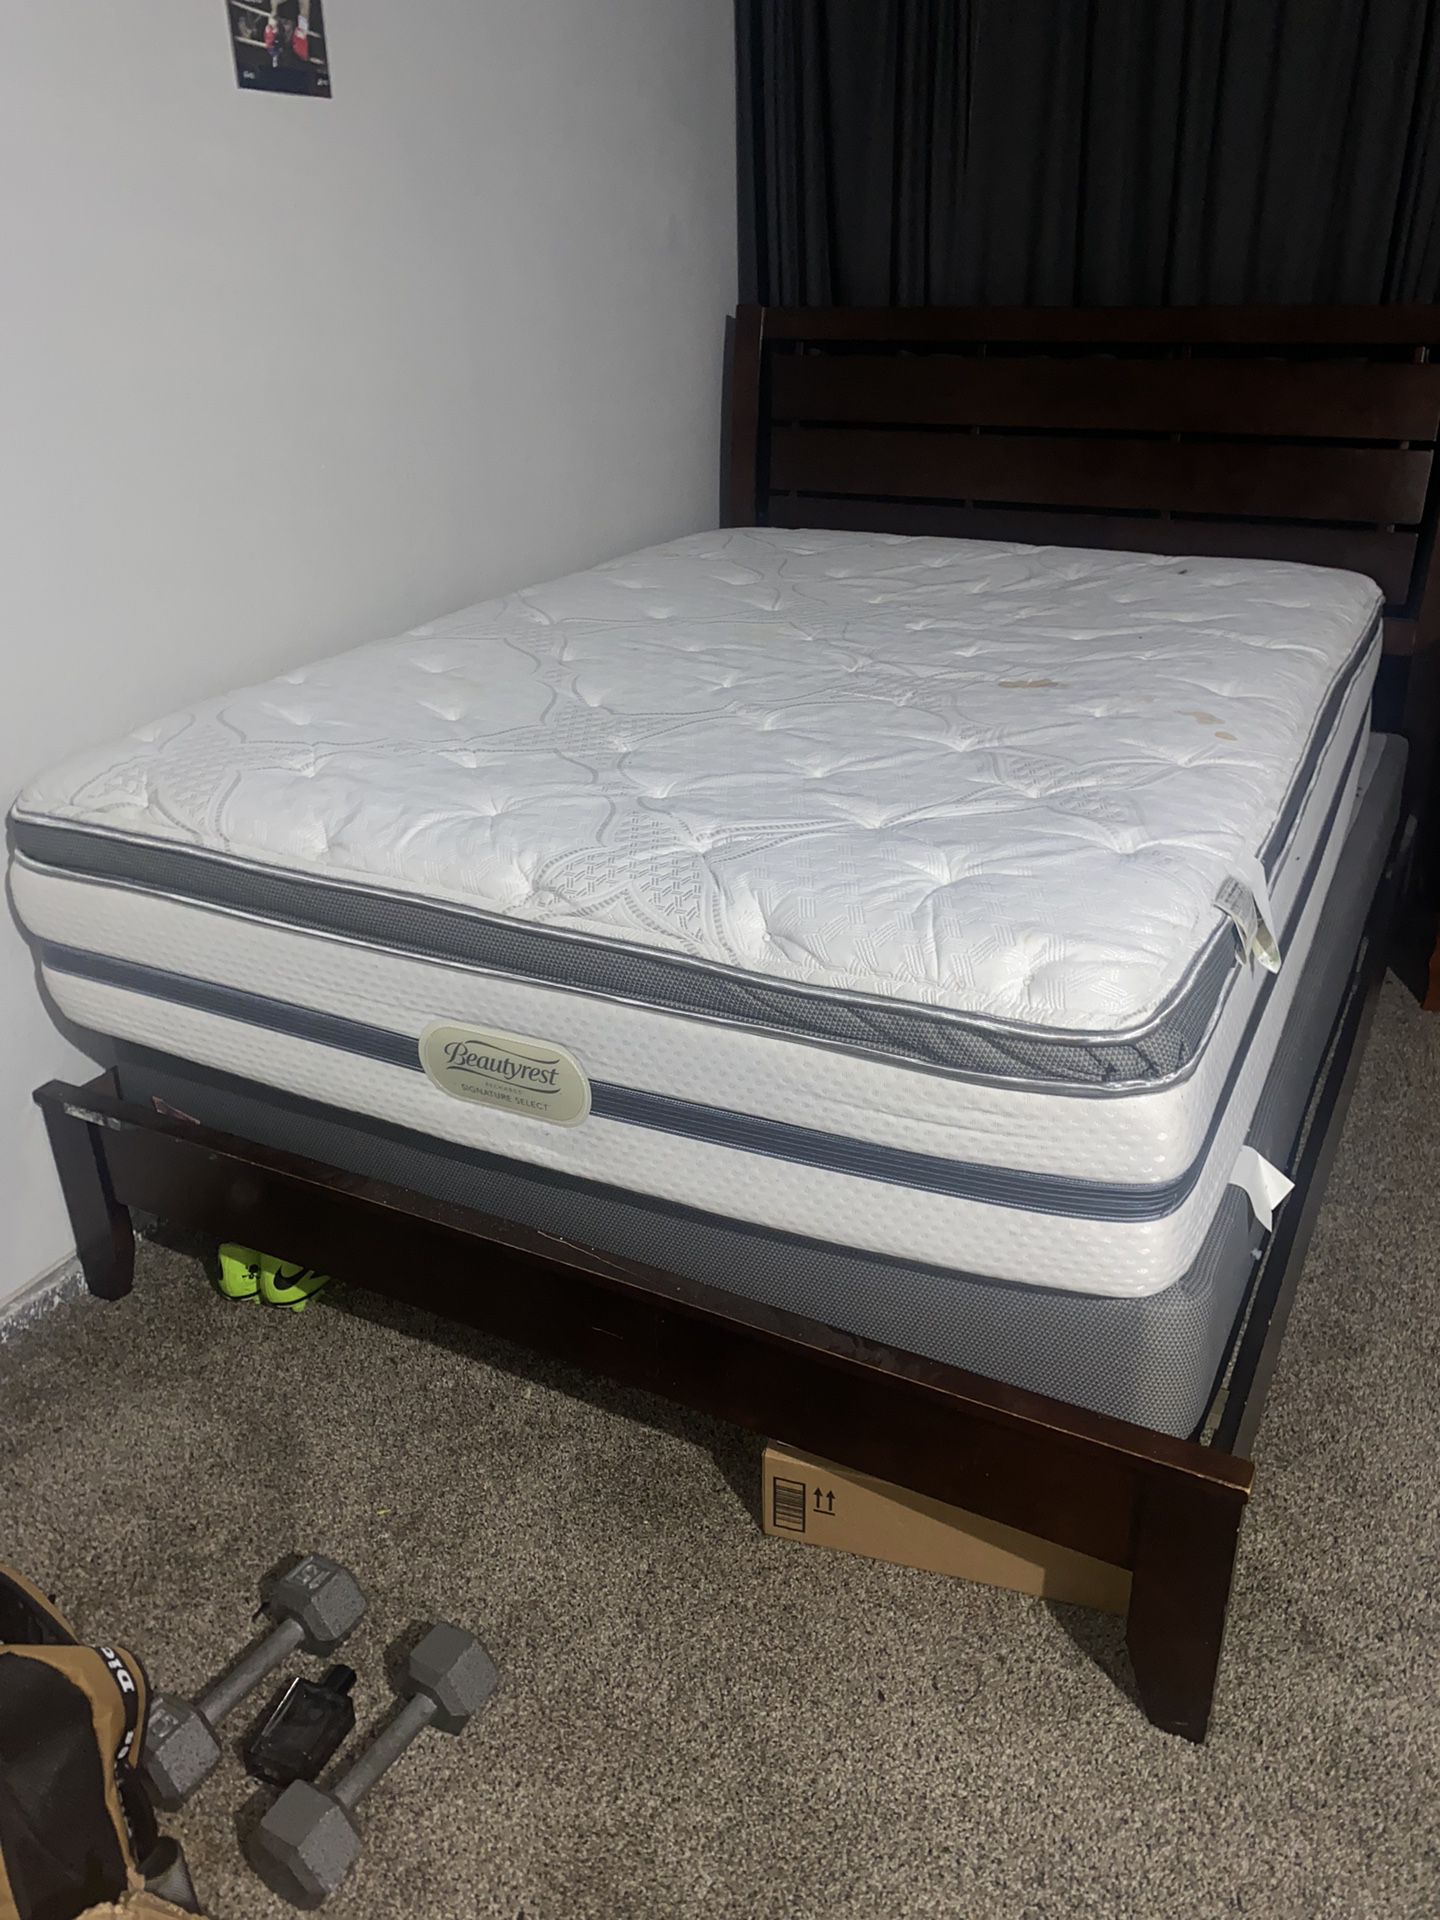 Bed Mattress And Frame